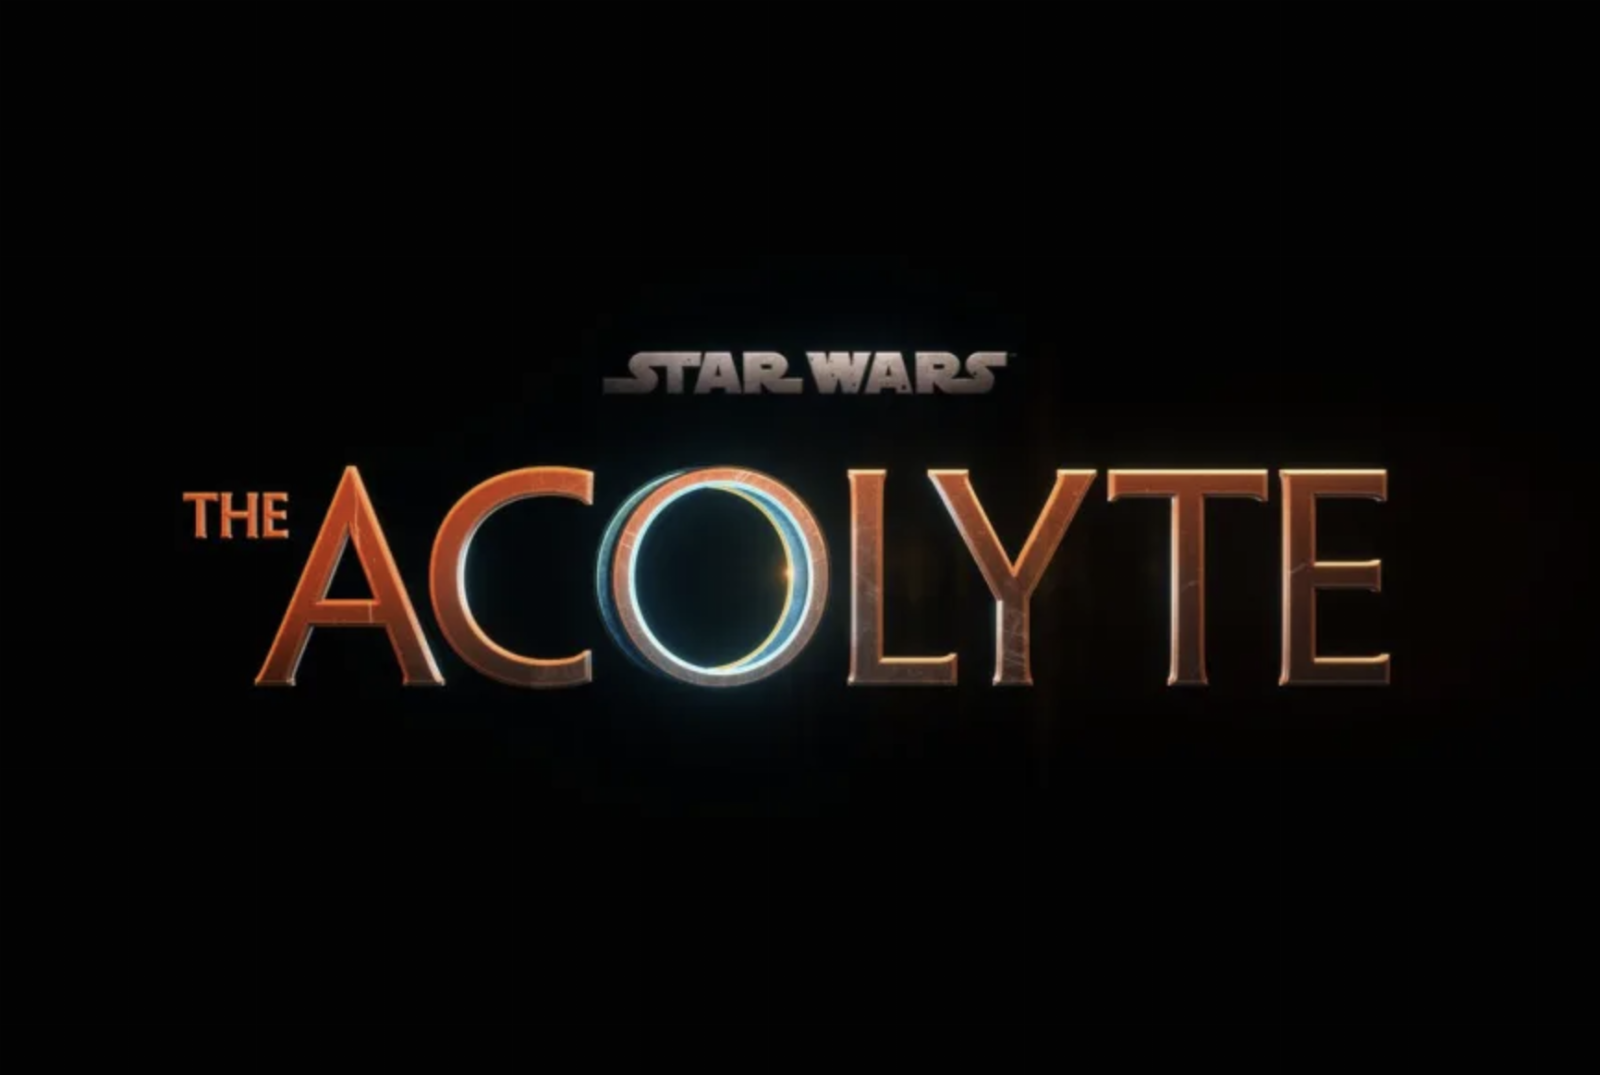 ‘The Acolyte’ Star Wars series will debut on Disney+ in 2024